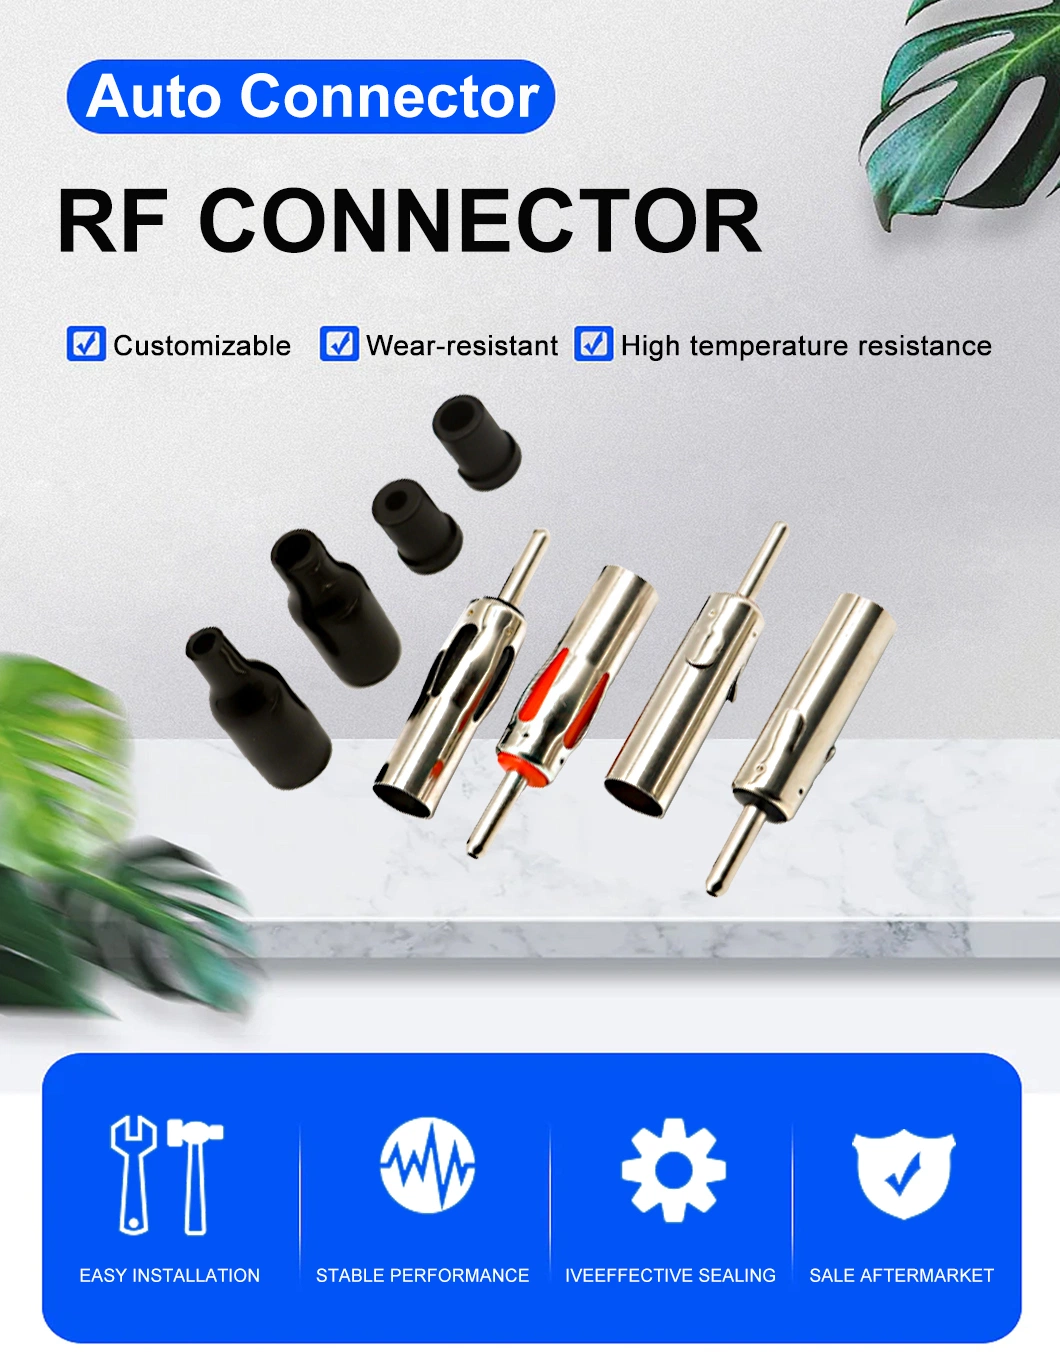 Custom RF Automatic Connectors for Wear and Temperature Resistant Coaxial Cables in Factories